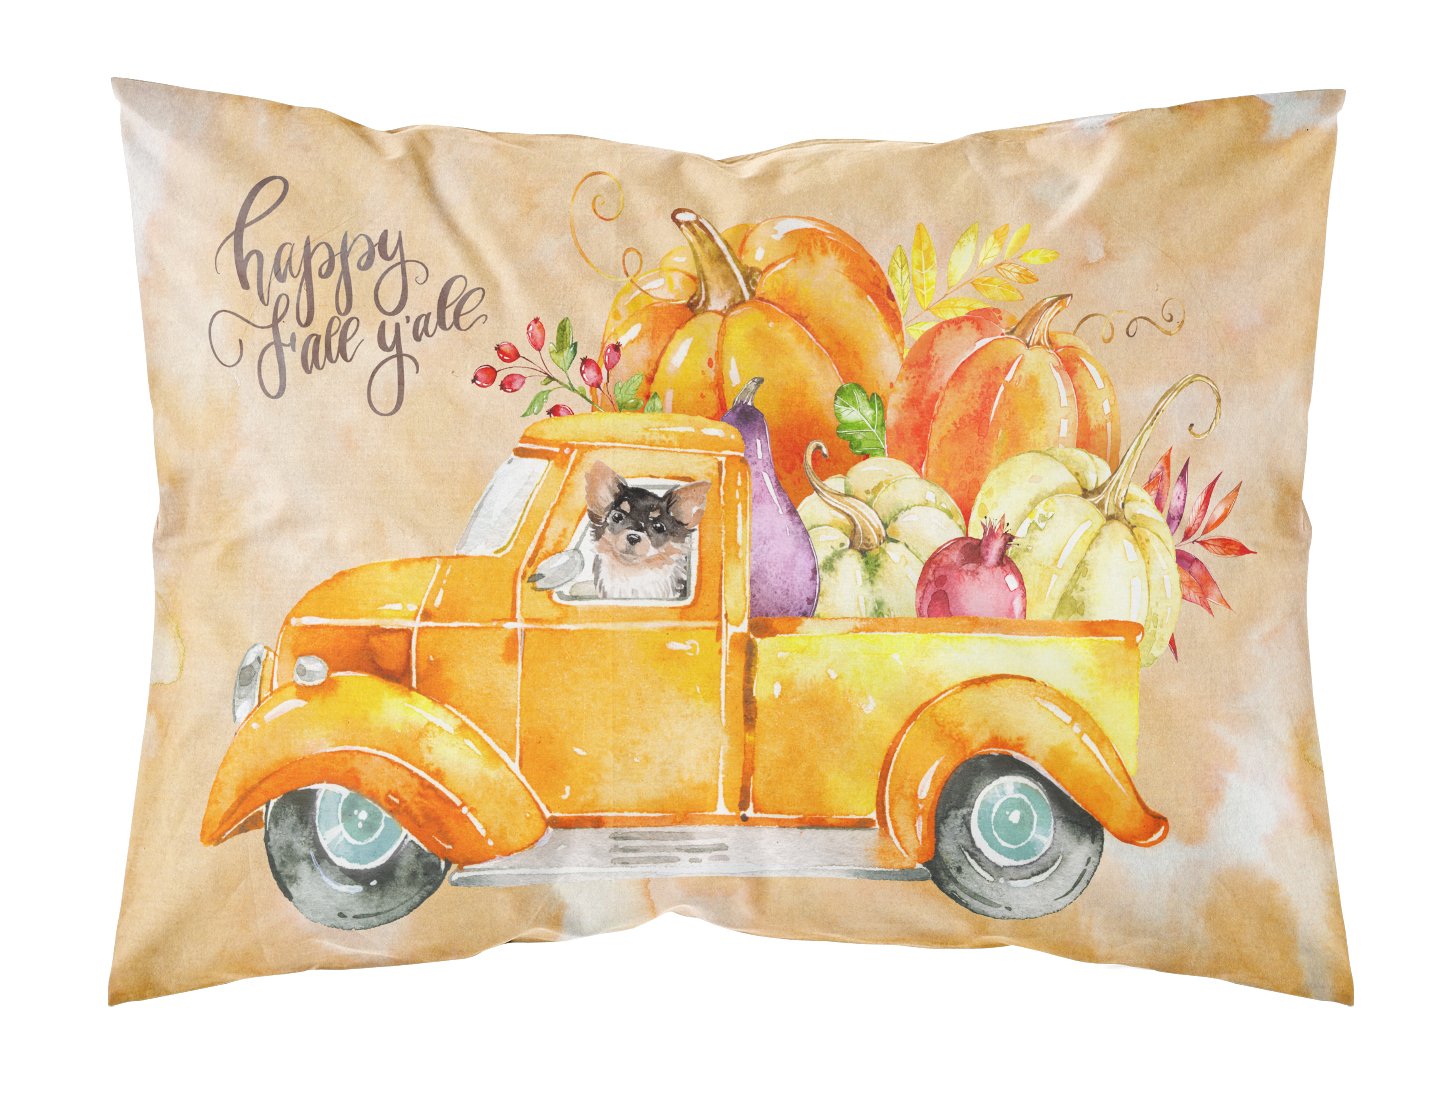 Fall Harvest Long Haired Chihuahua Fabric Standard Pillowcase CK2672PILLOWCASE by Caroline's Treasures